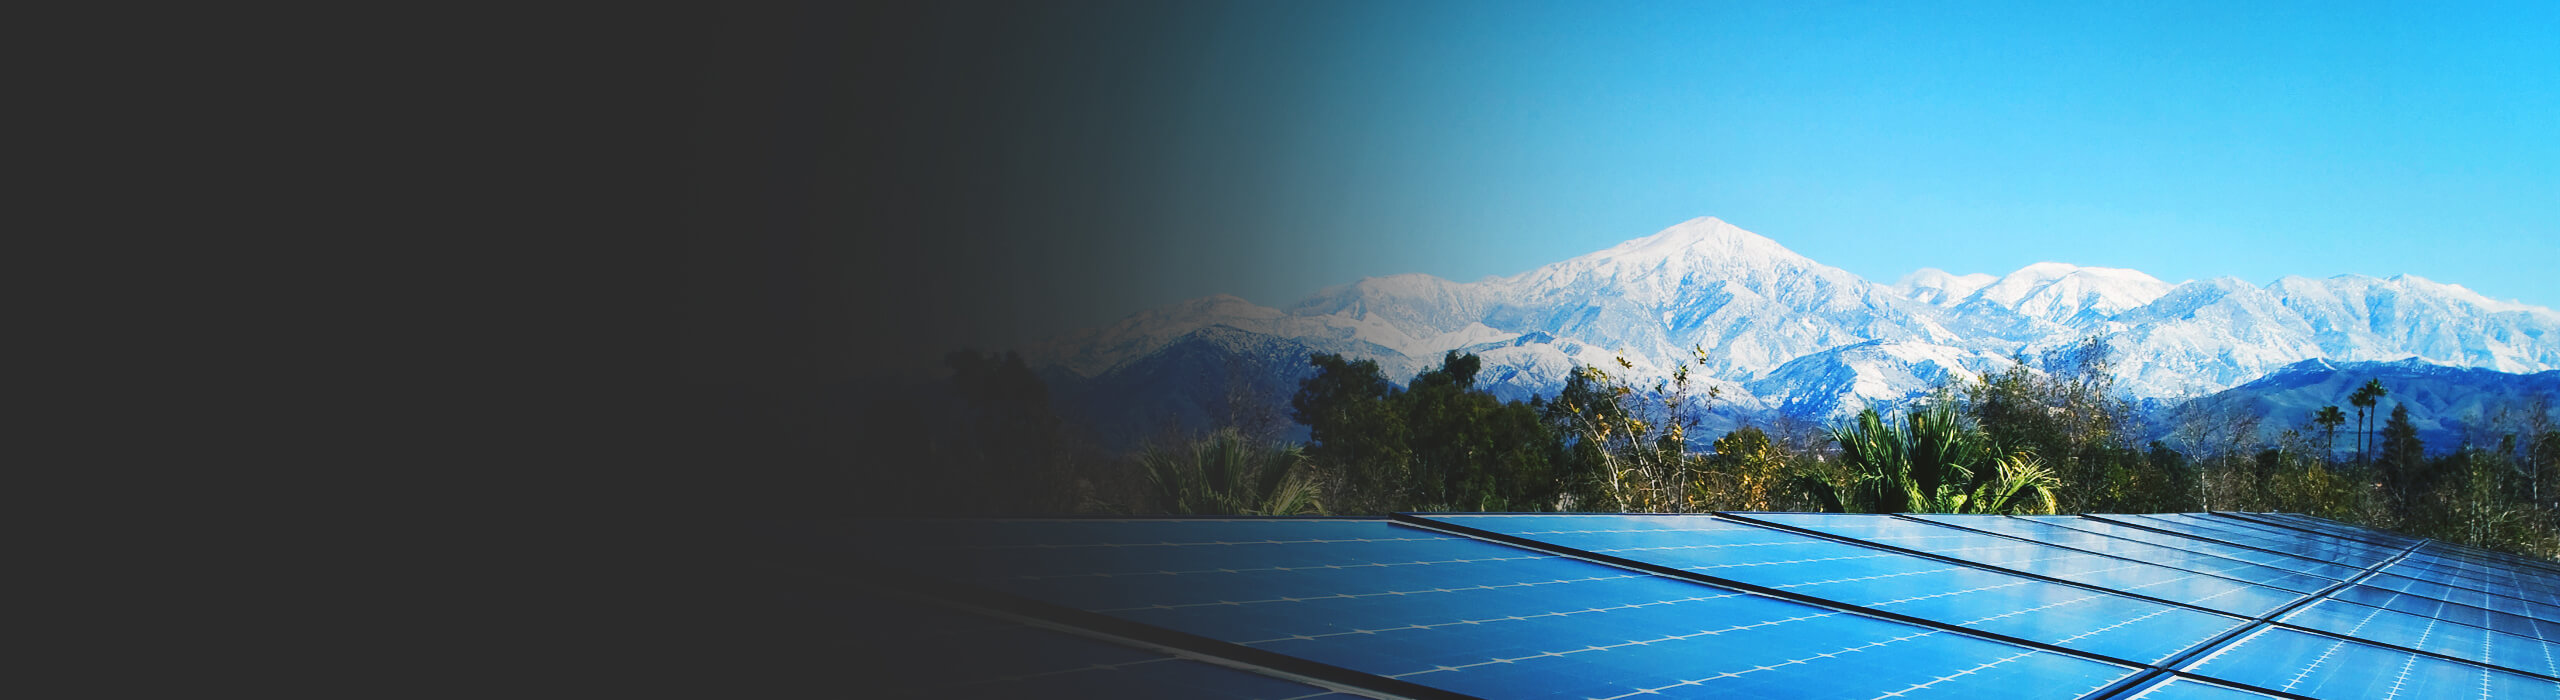 A panorama image of a treetop-filled landscape with snow-covered mountains in the distance and rows of solar panels in the foreground